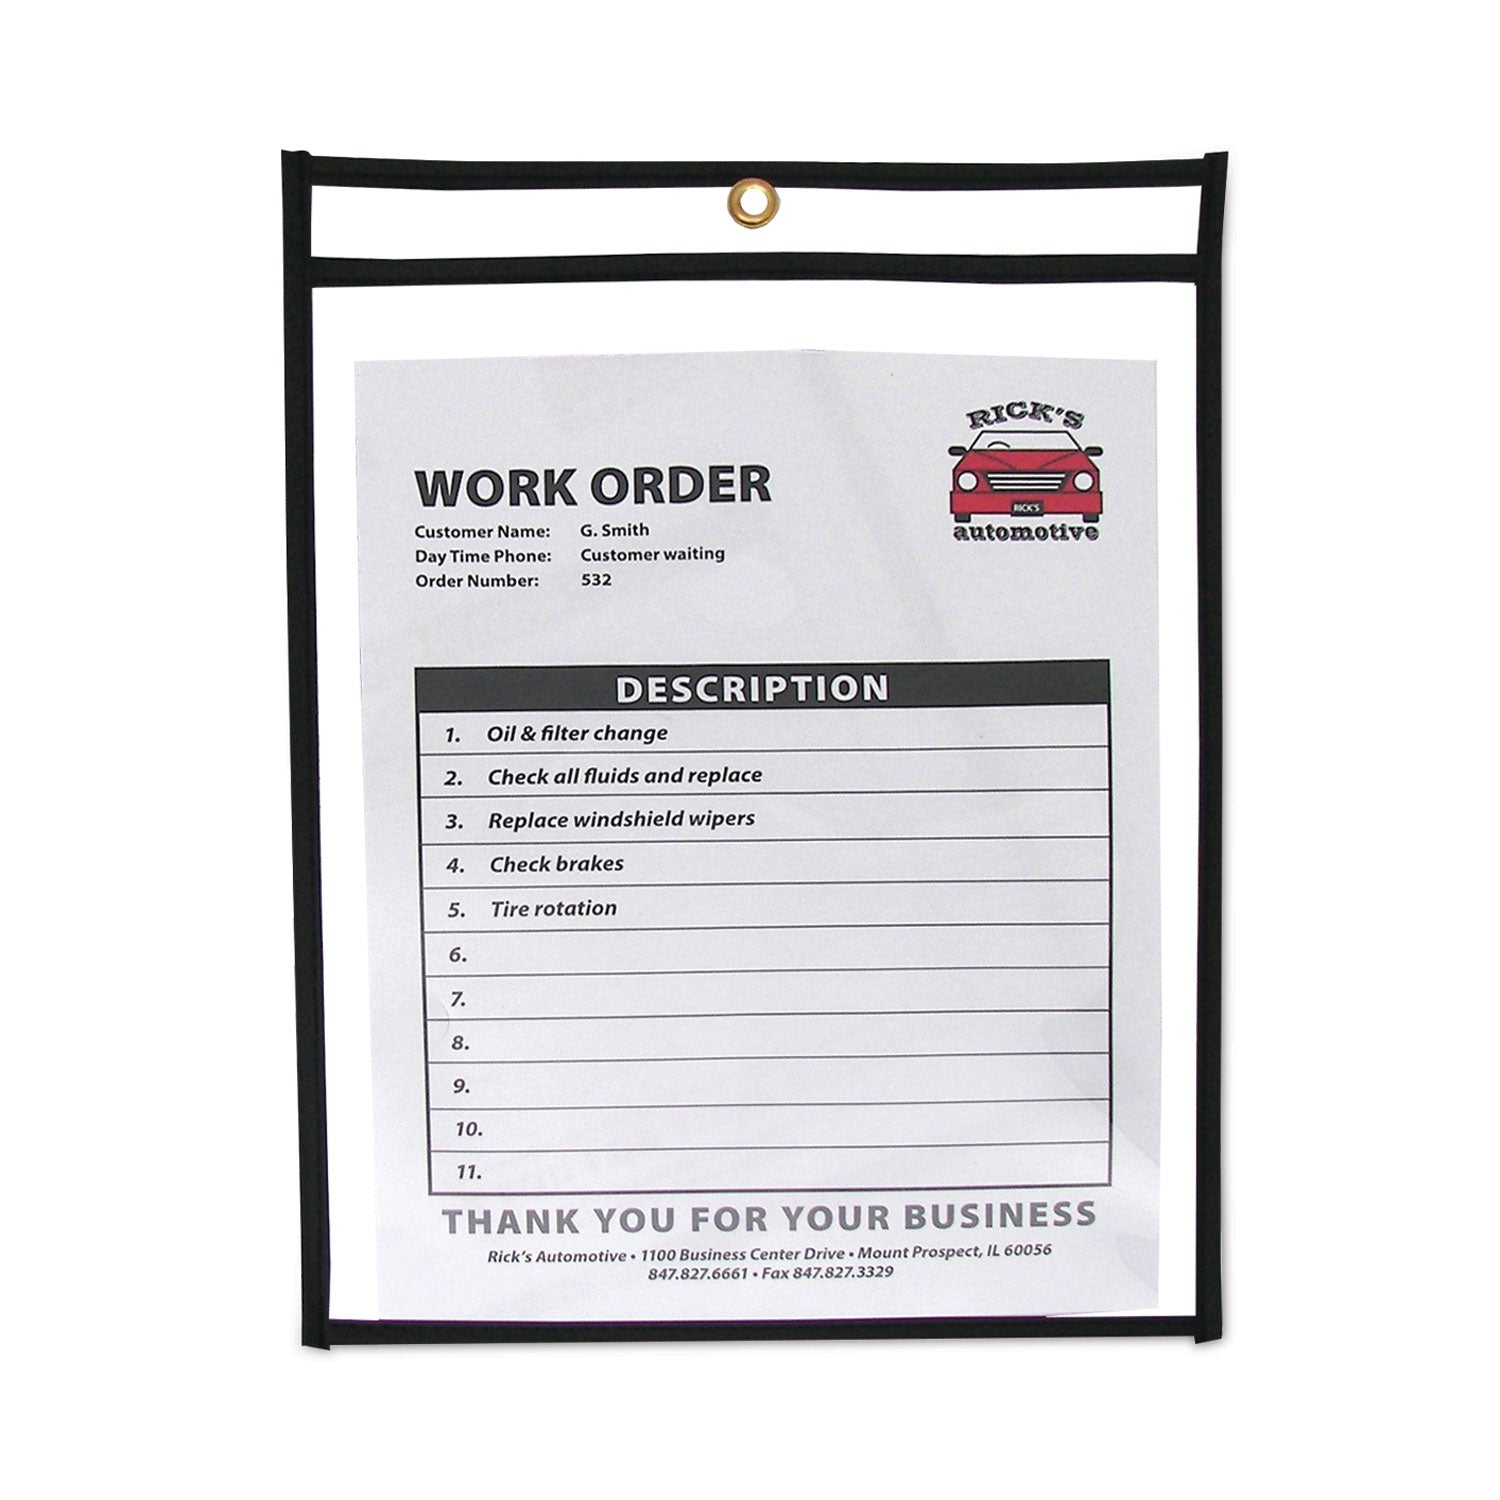 Shop Ticket Holders, Stitched, Both Sides Clear, 75 Sheets, 9 x 12, 25/Box - 